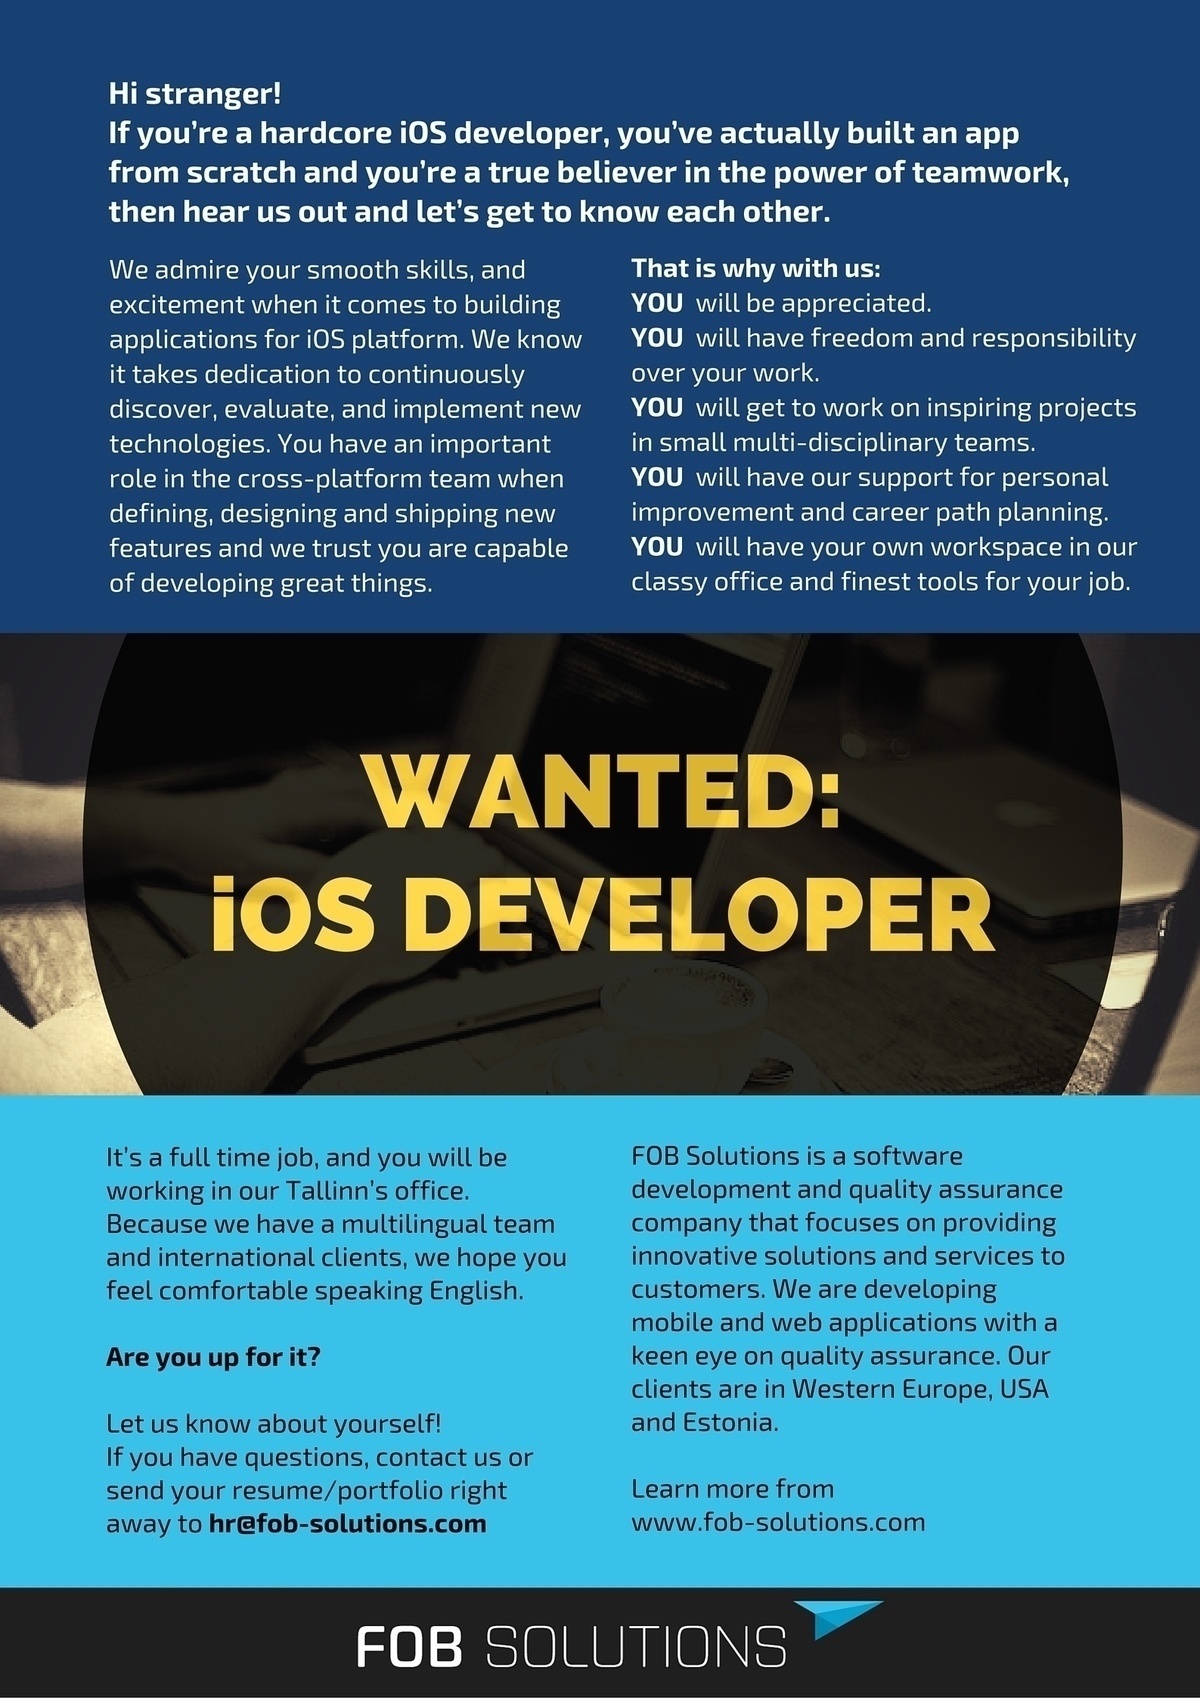 FOB Solutions OÜ Wanted: iOS DEVELOPER